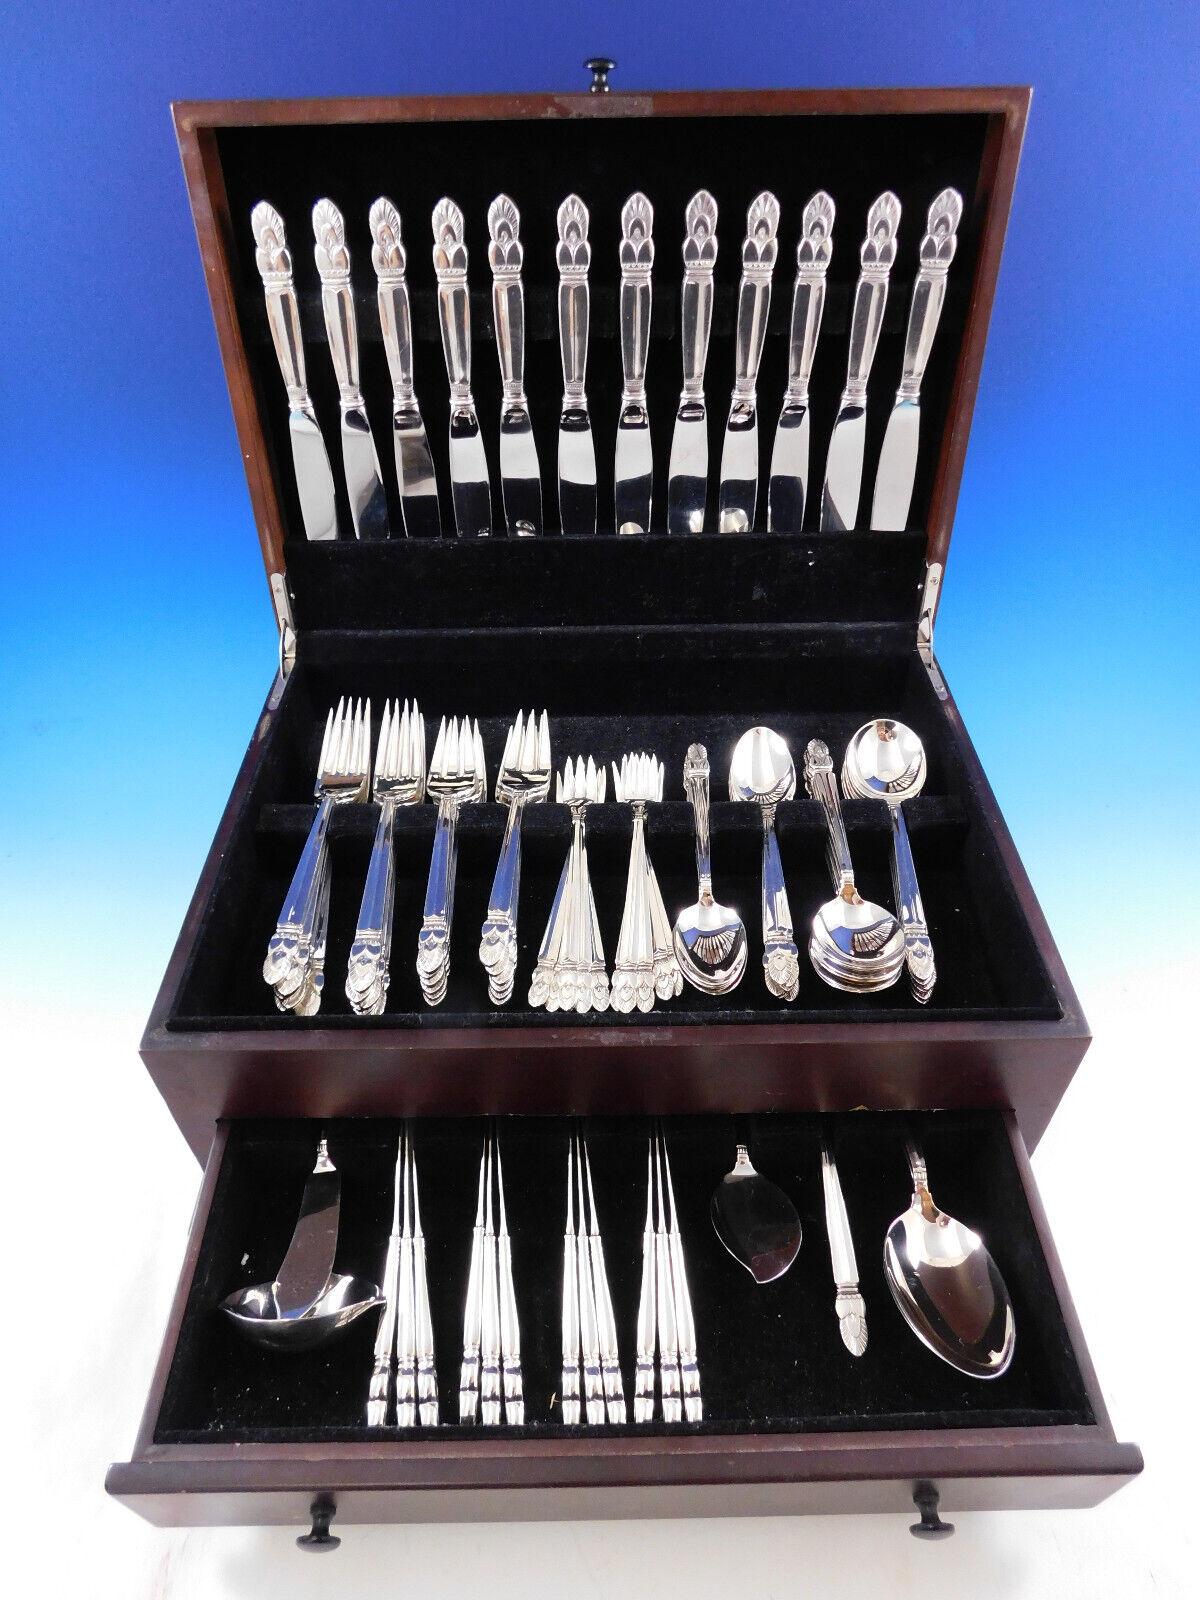 Gorgeous Princess Ingrid by Frank Whiting Sterling Silver flatware set - 90 pieces. This set includes:
12 regular knives, 9